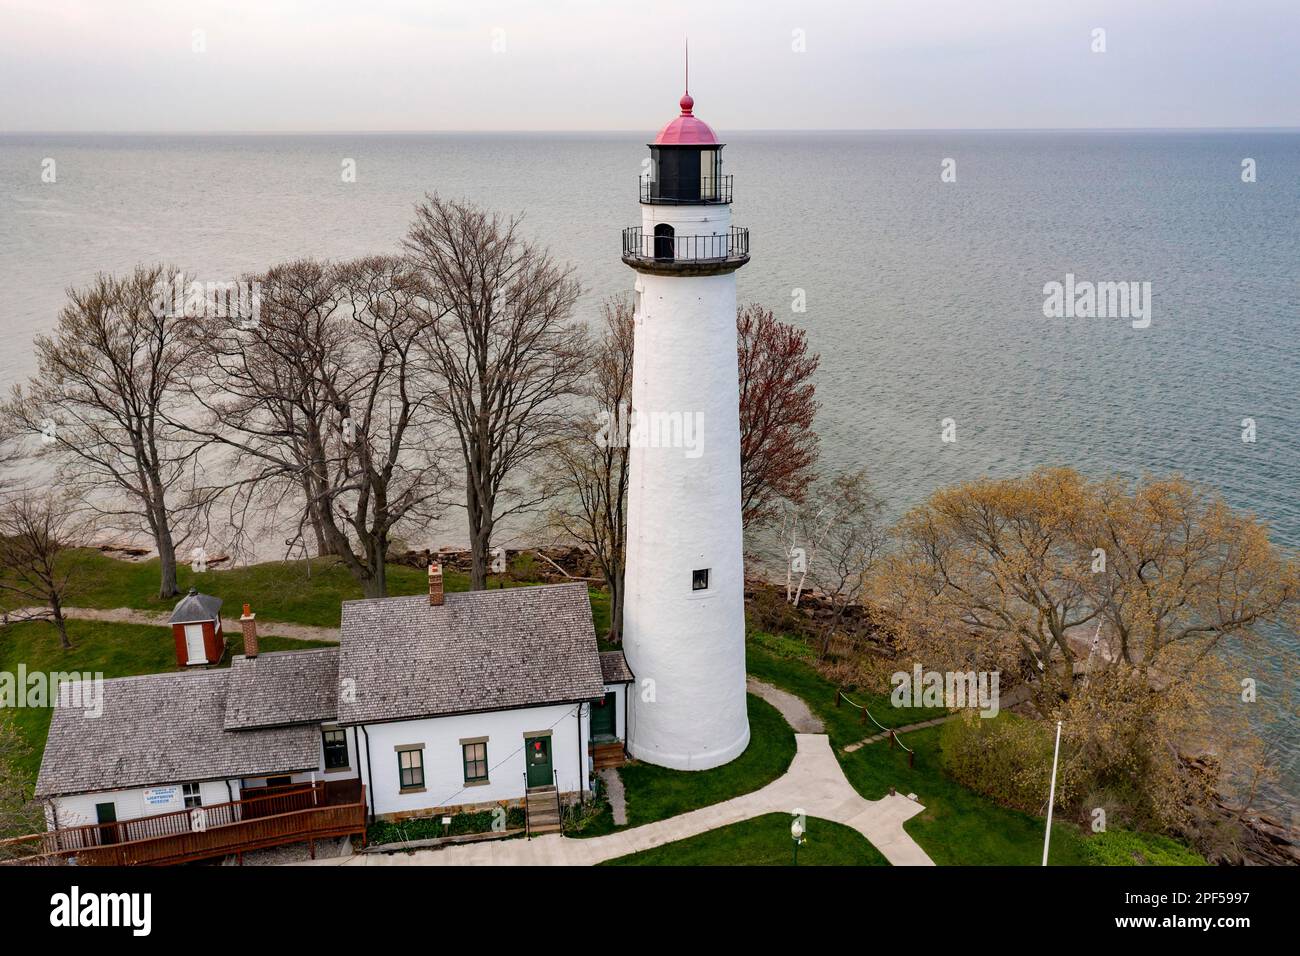 Port Hope, Michigan, The Pointe Aux Barques Lighthouse on Lake Huron. Built in 1857, it is one of the oldest continuously operating Lights on the Stock Photo